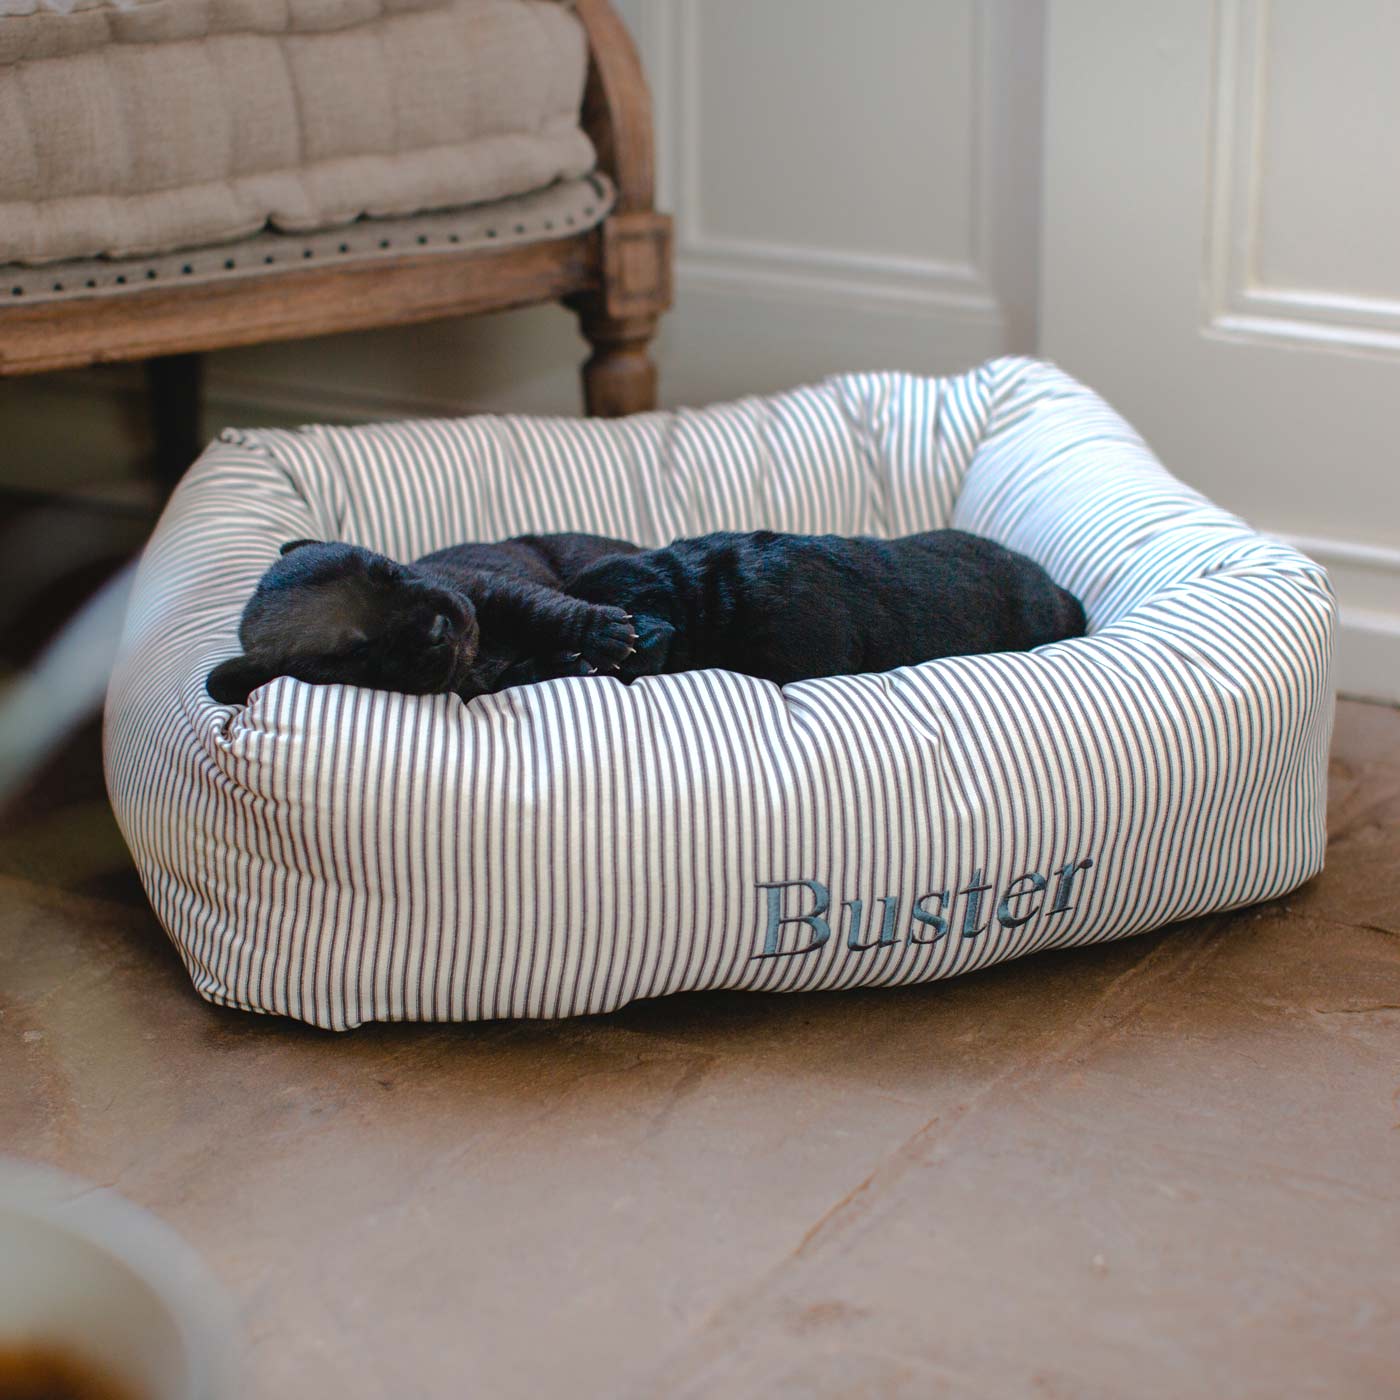 Luxury, Handmade Box Bed For Dogs, A Stunning Regency Stripe Dog Bed Perfect For Your Pets Nap Time! Available at Lords & Labradors US